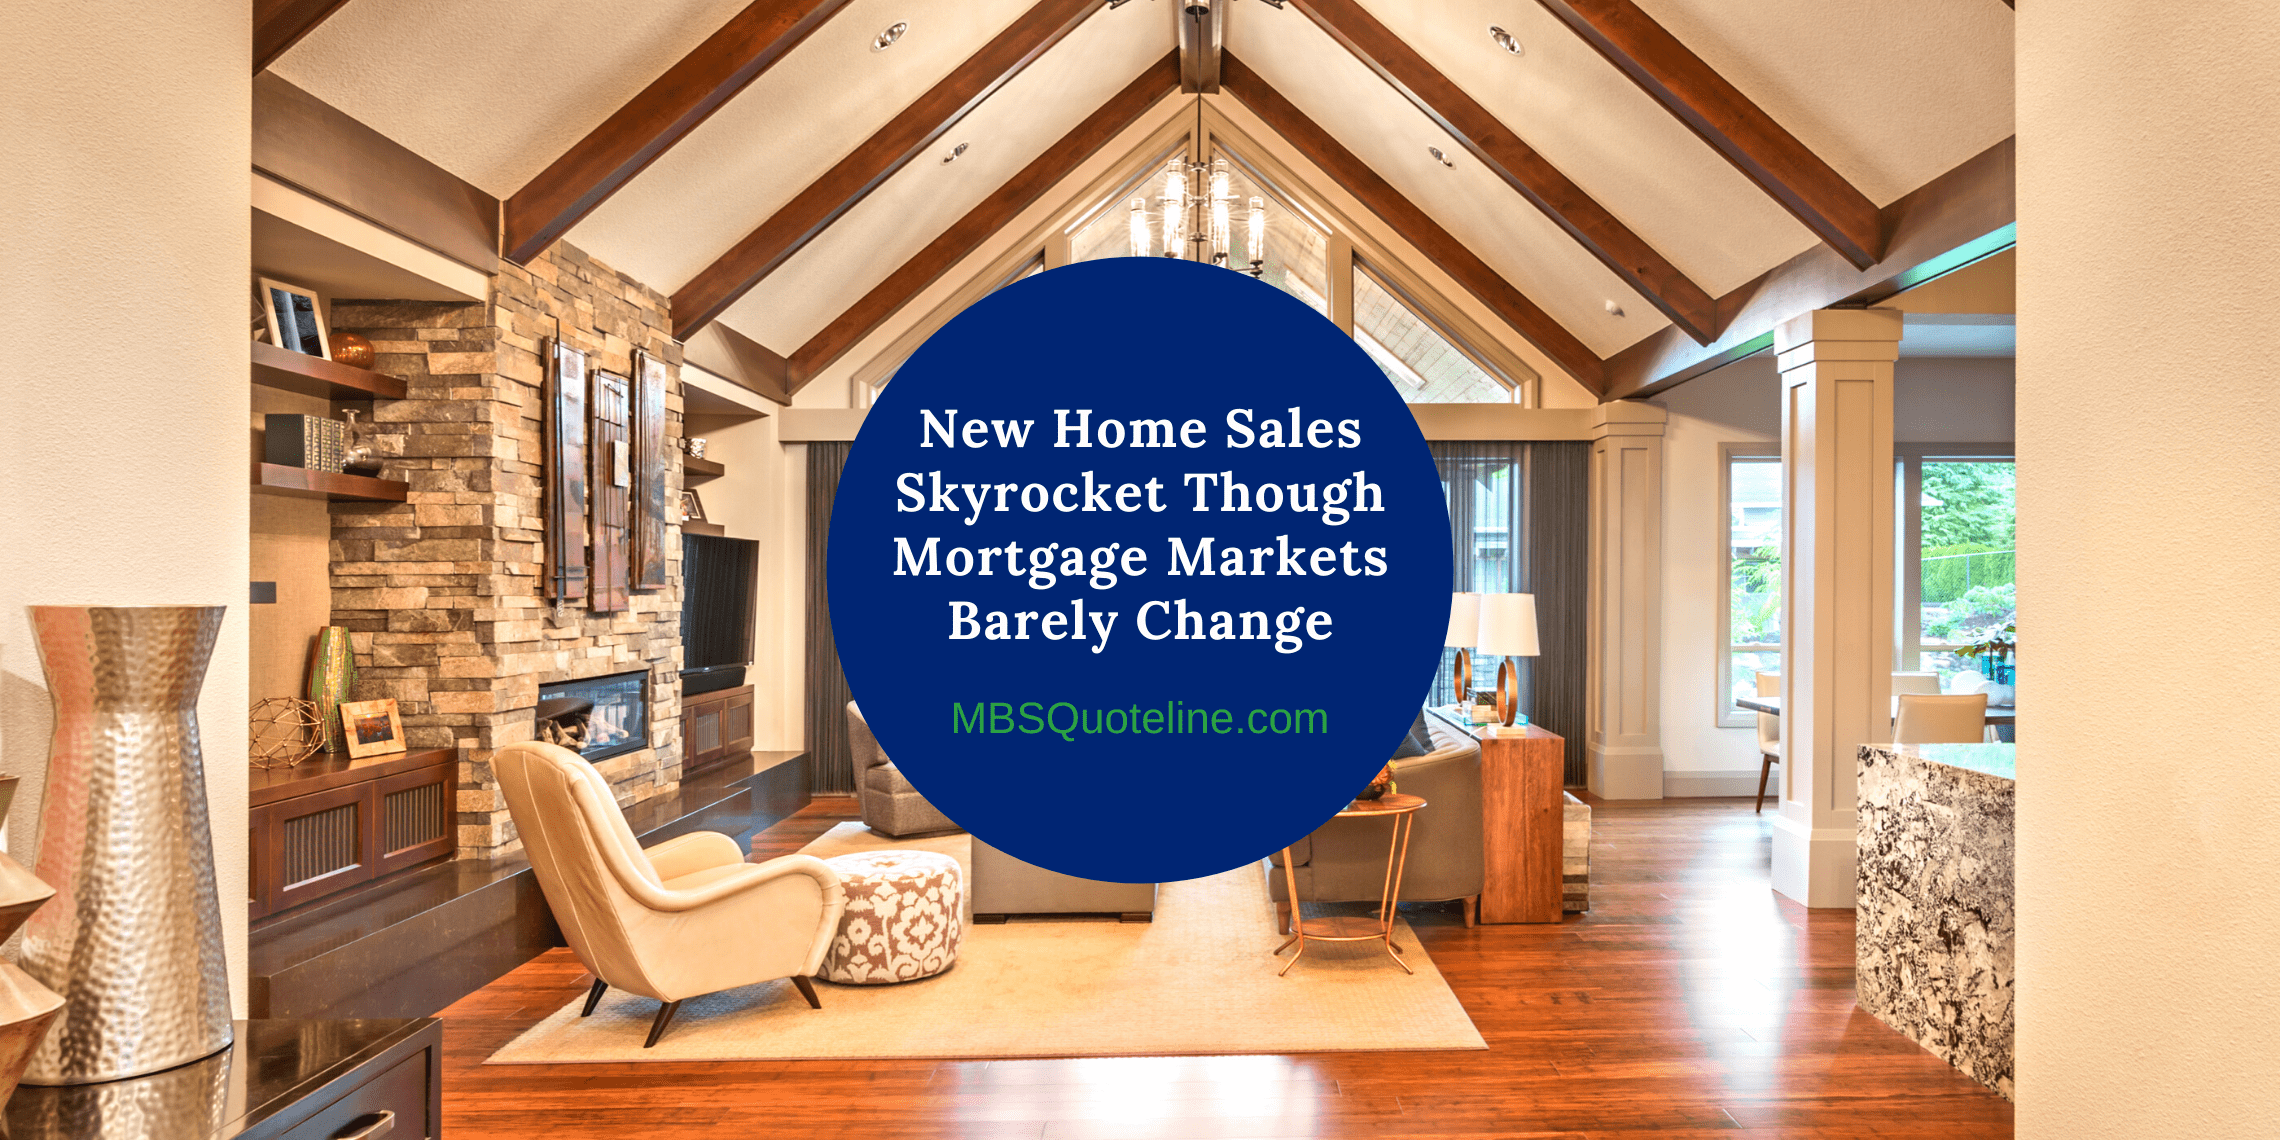 New Home Sales Skyrocket Though Mortgage Markets Barely Change mortgagetime mbsquoteline featured